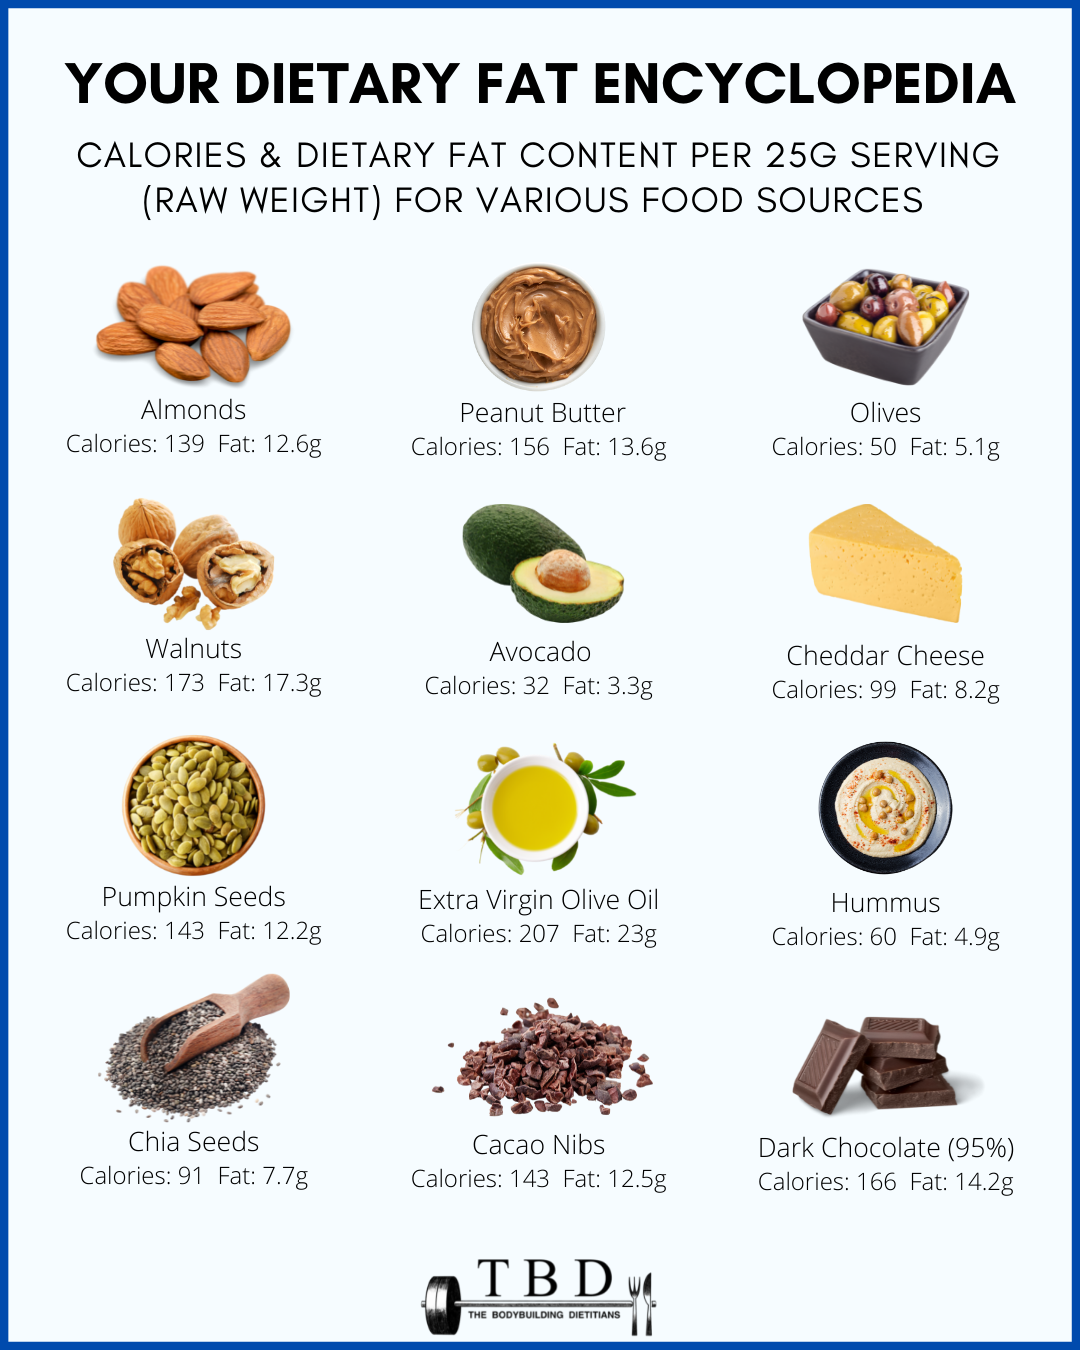 How Many Calories Are In These Healthy Fat Sources? — The Bodybuilding